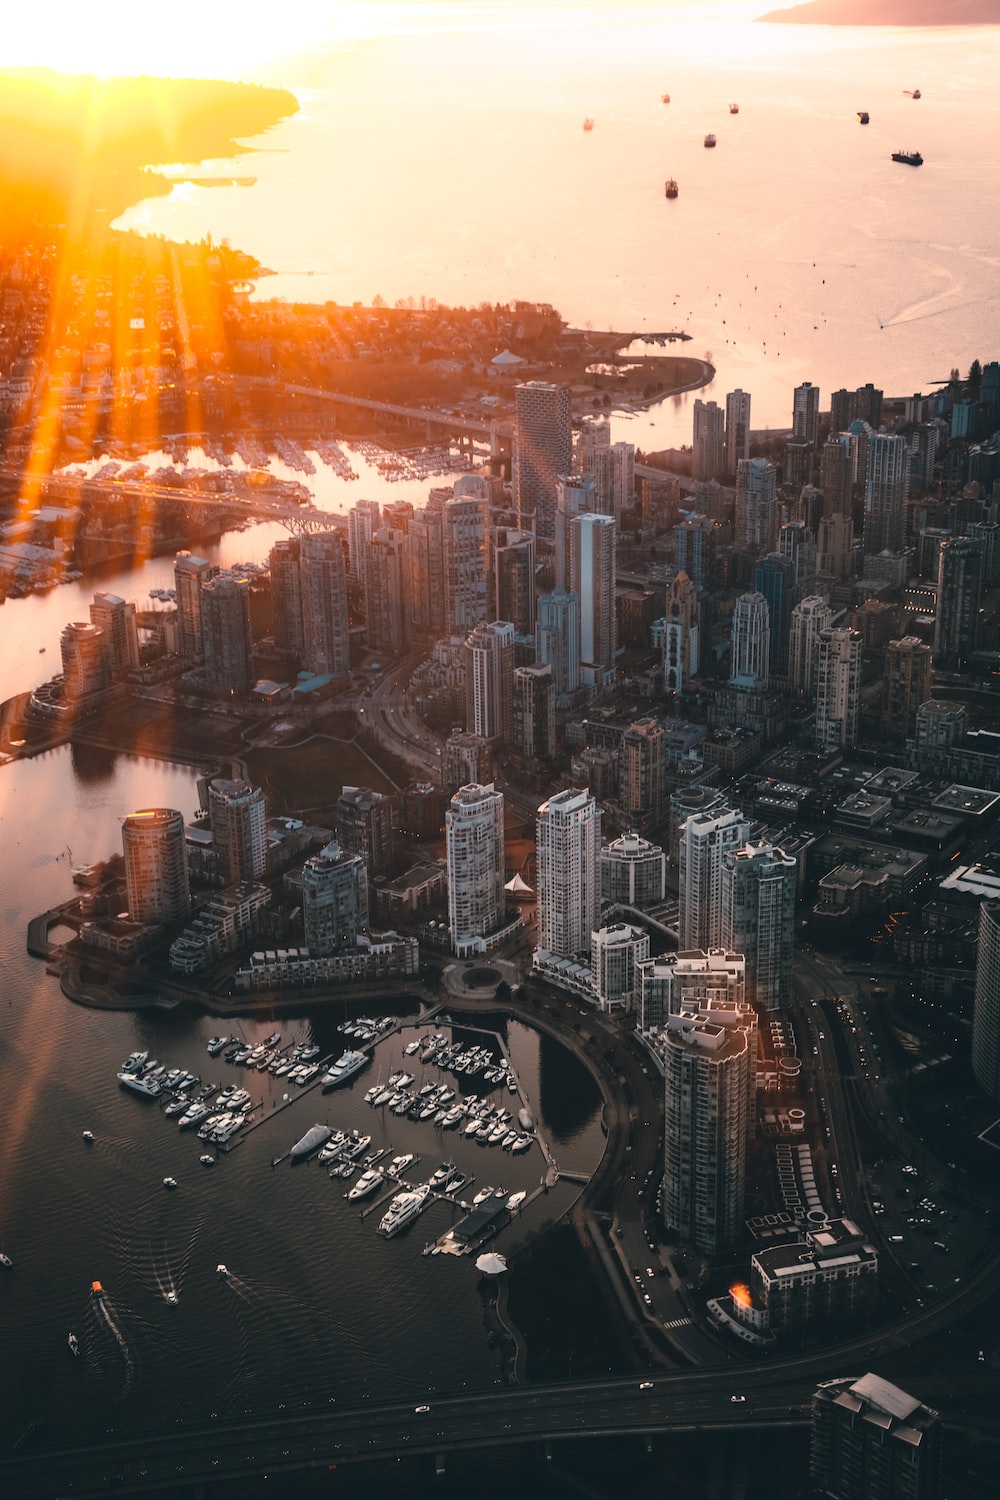 Vancouver pictures download free images on